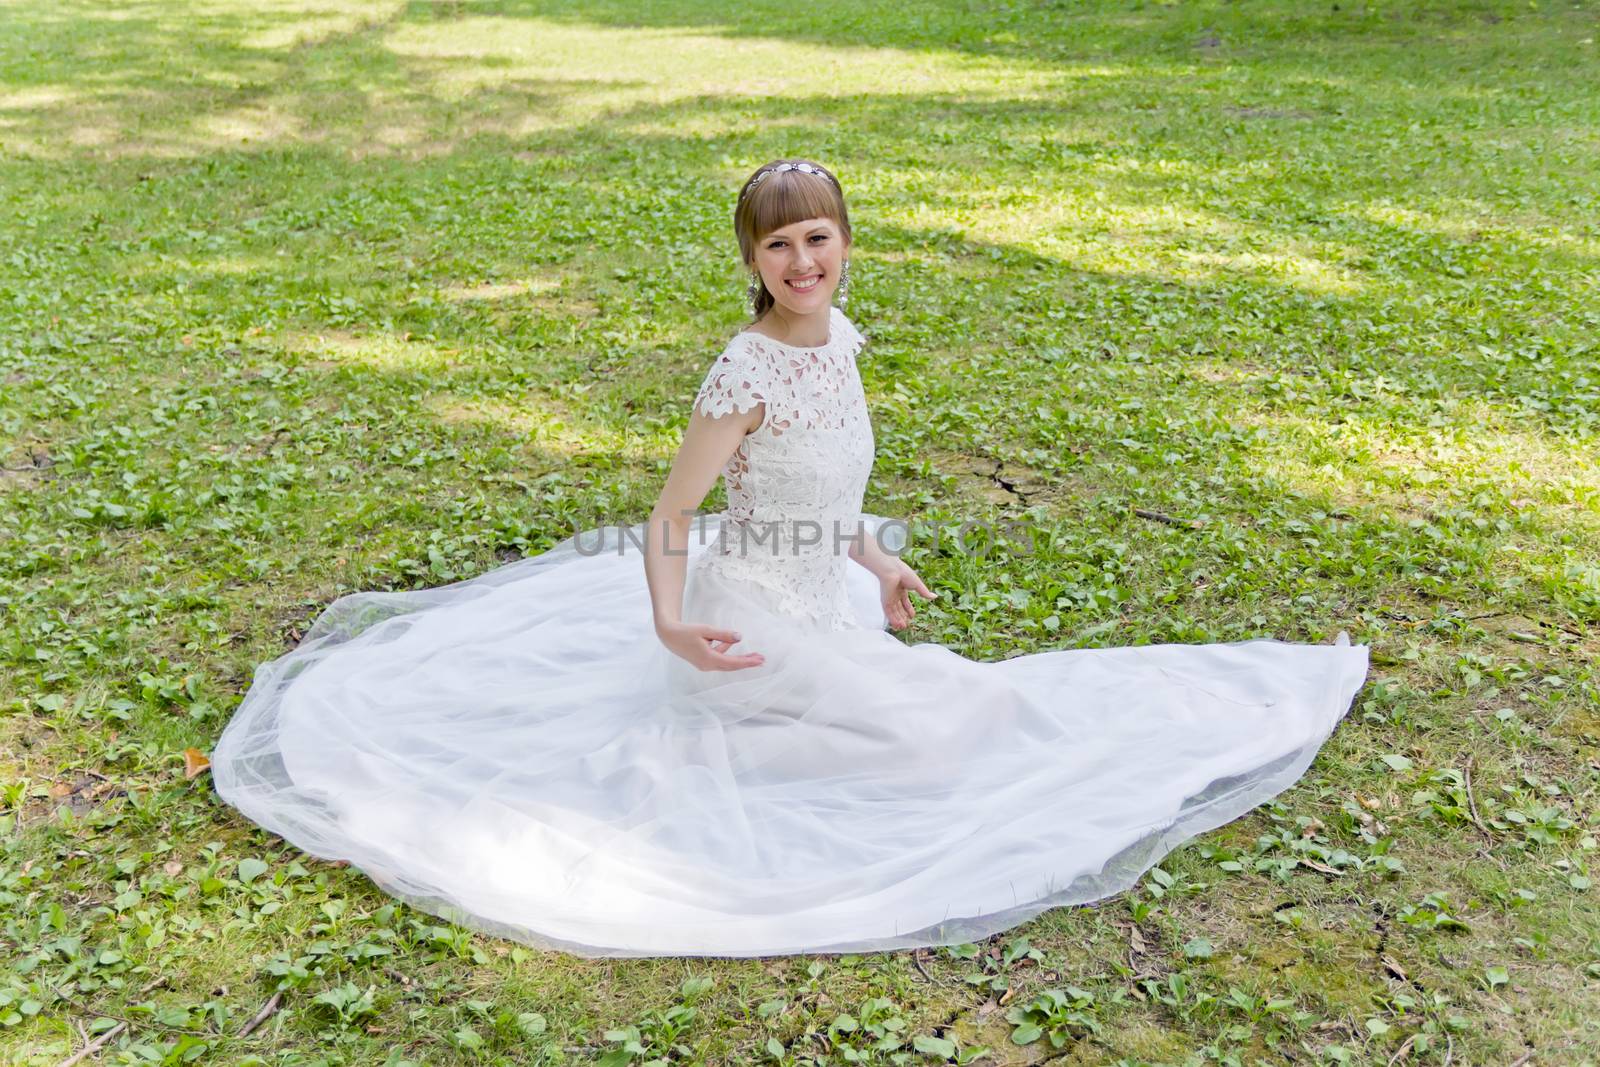 Beautiful bride in white lace dress of summer time by Julialine